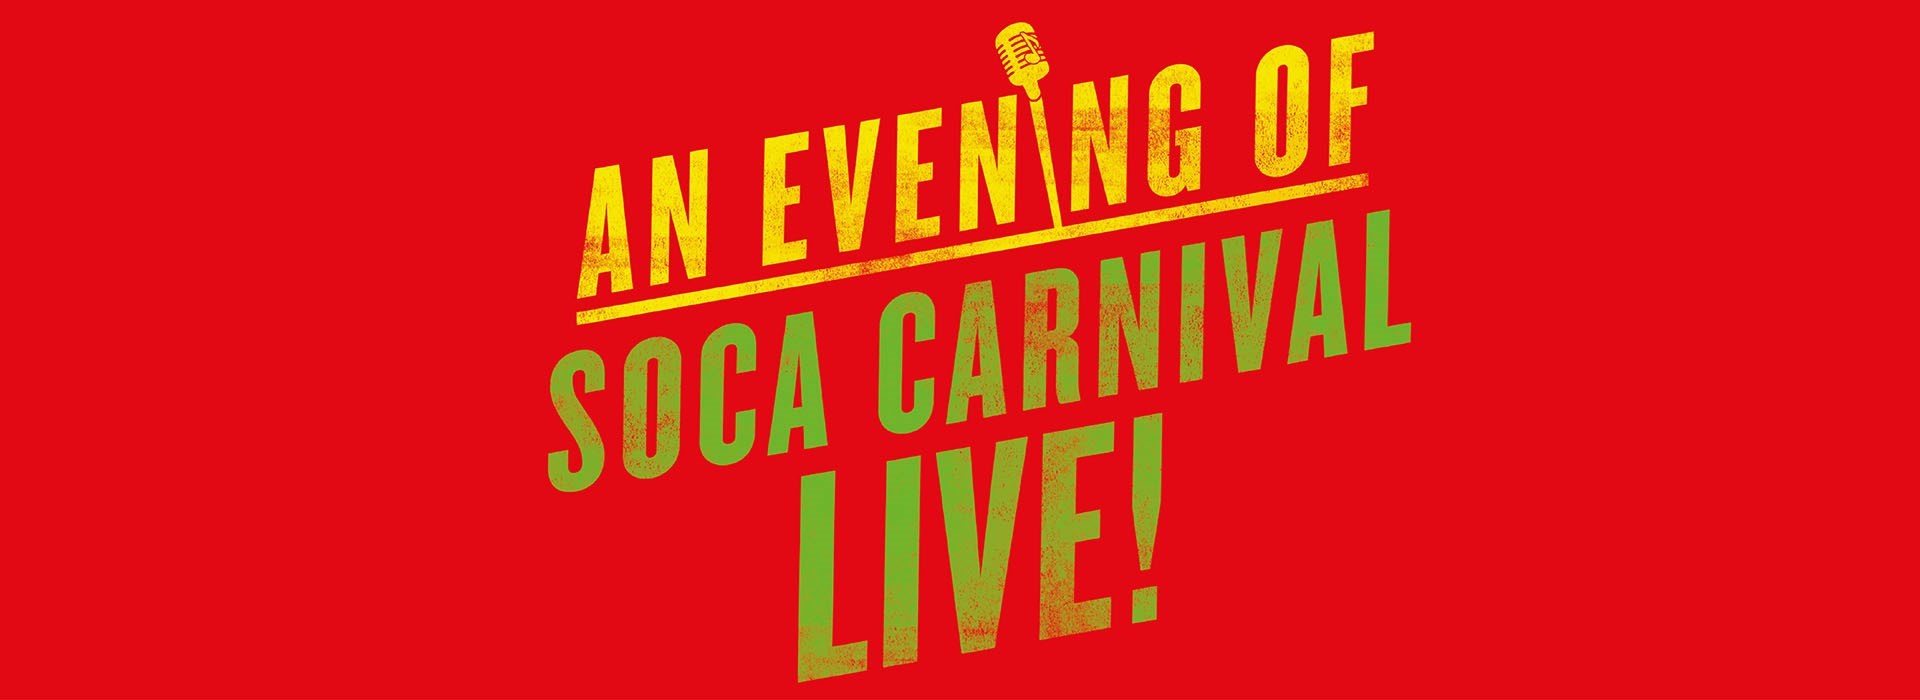 An Evening of Soca Carnival – LIVE!